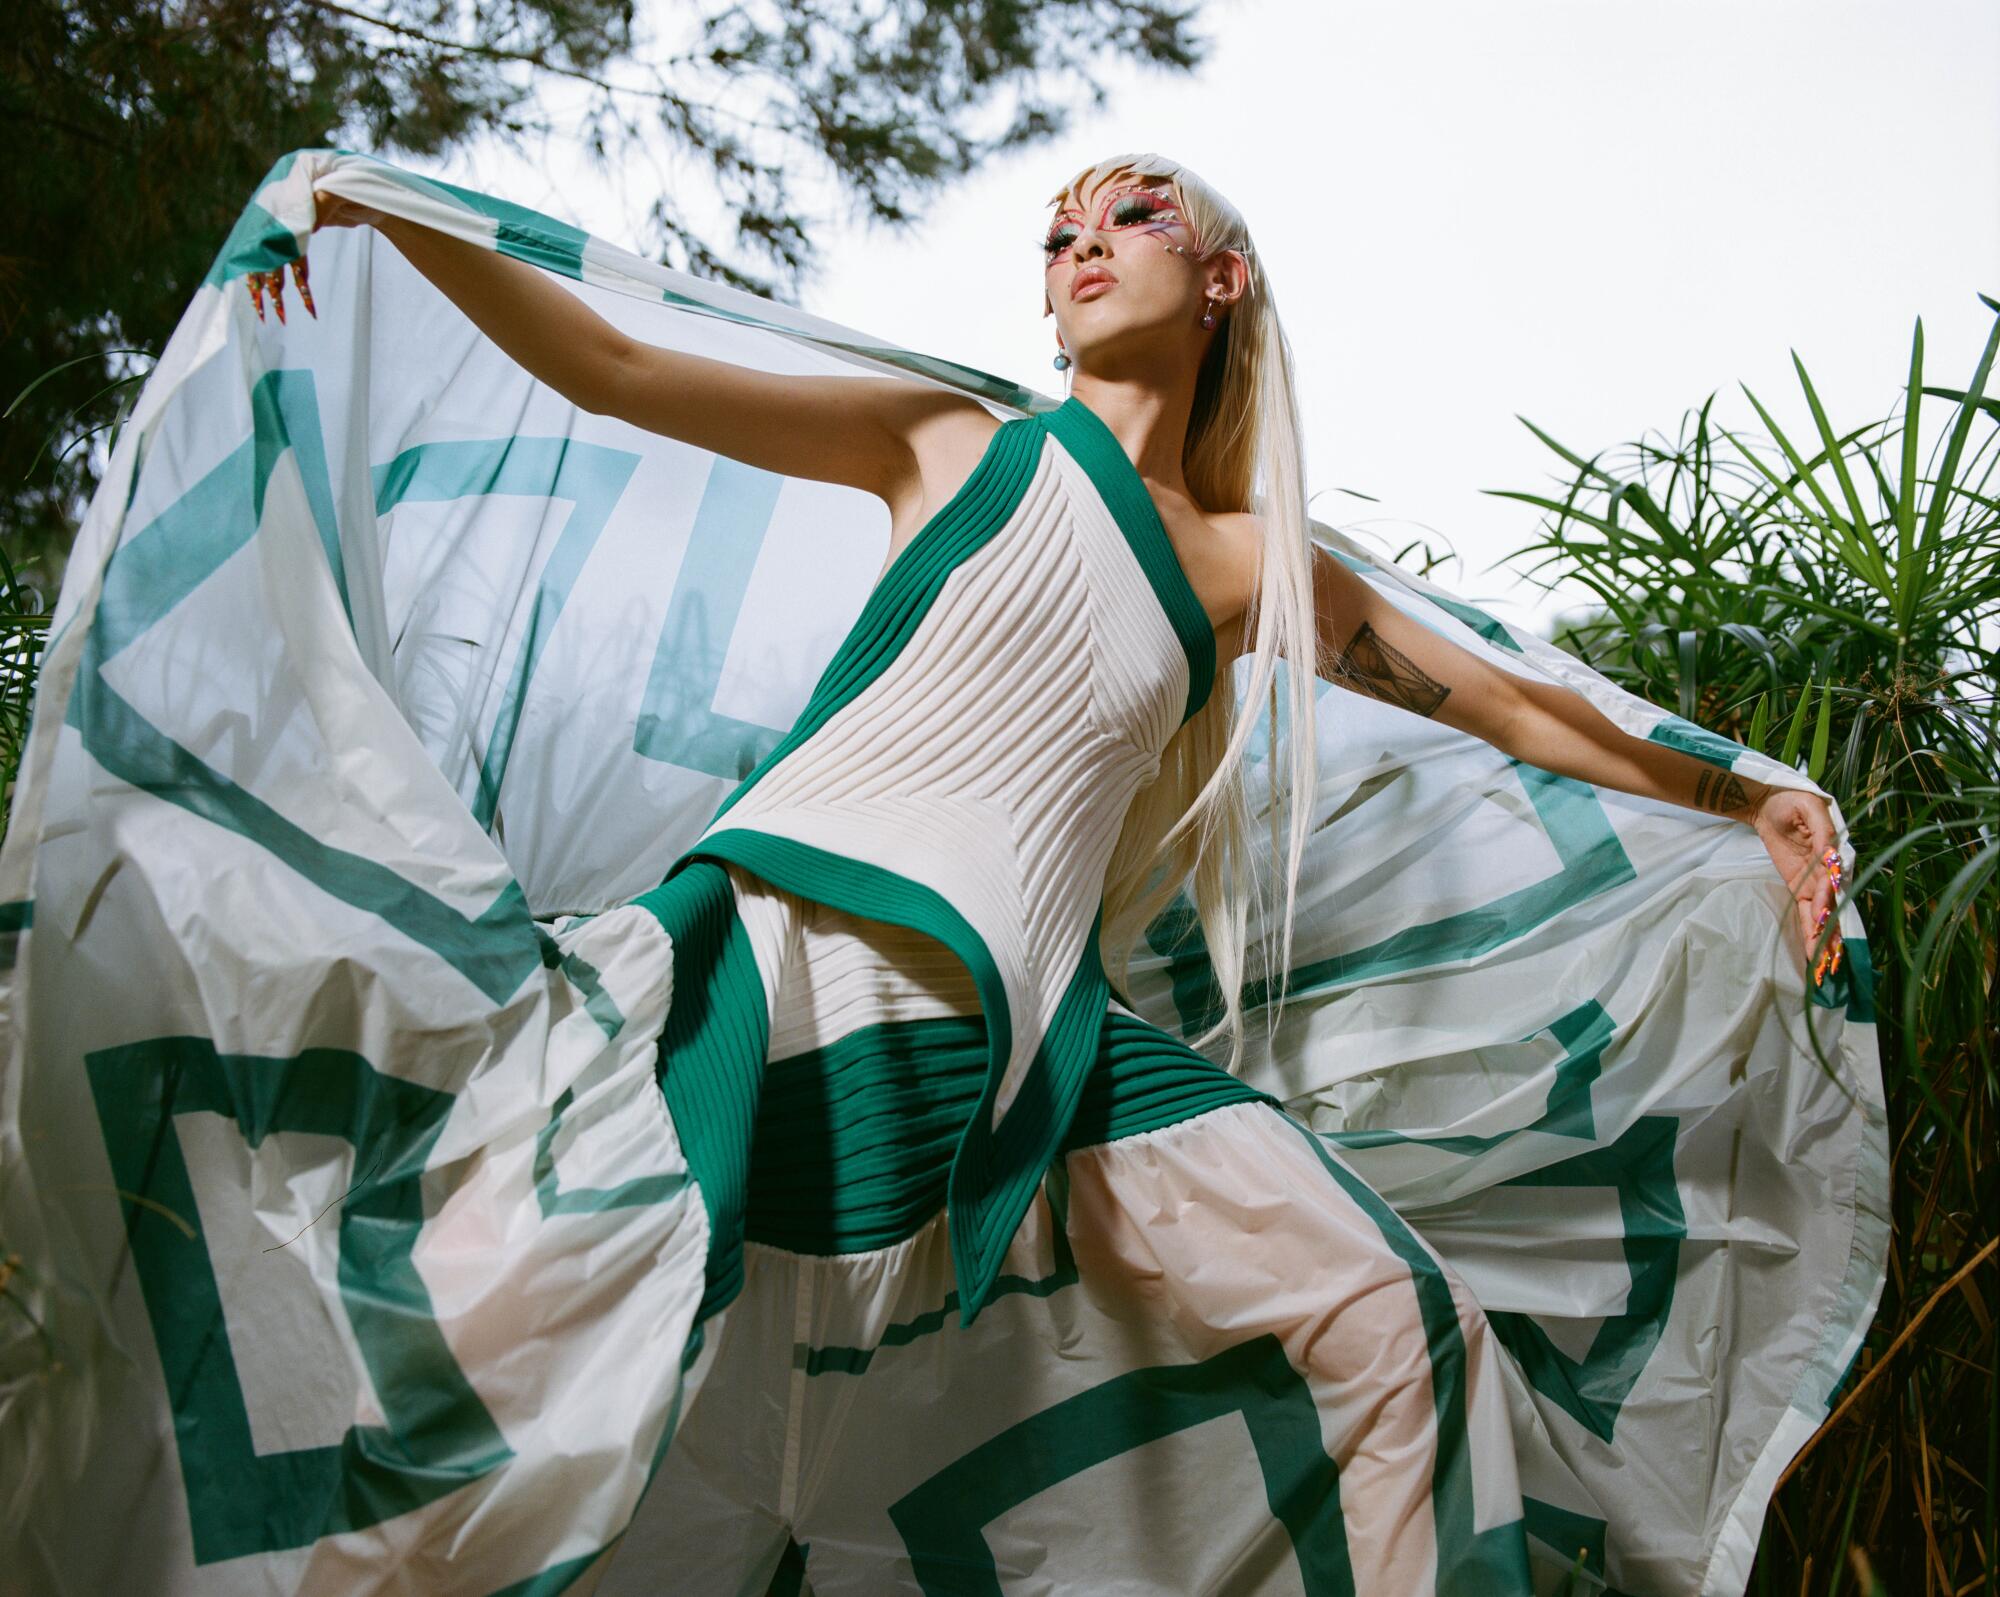 A model wears a one-shouldered tank over a skirt with a shawl, all in white fabric with green trim